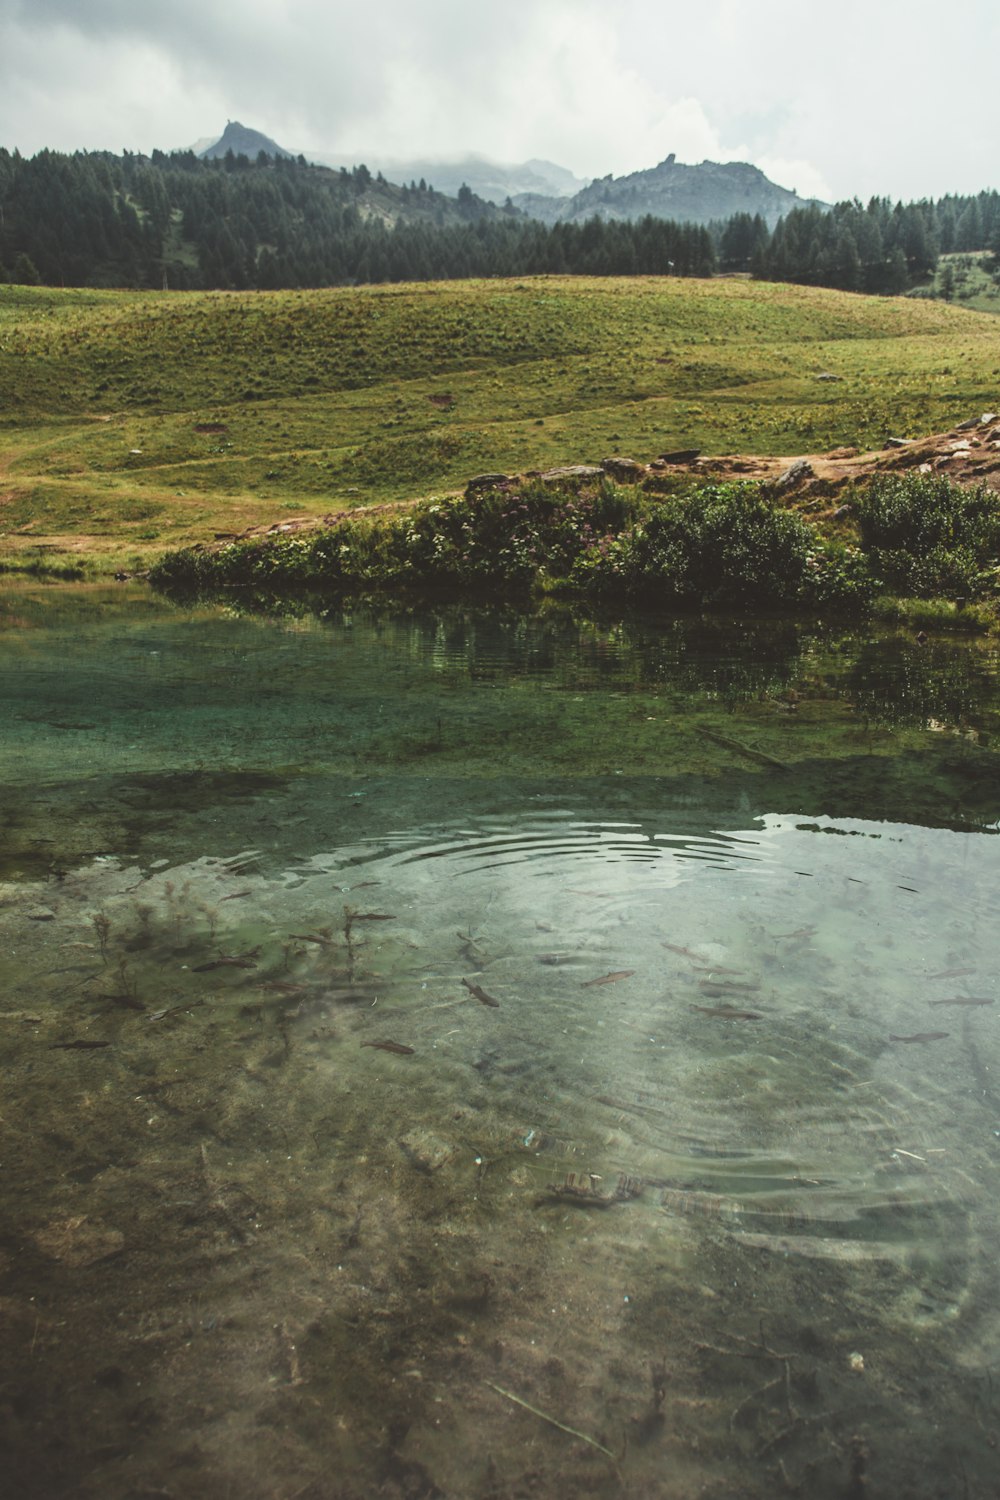 a body of water surrounded by a lush green field